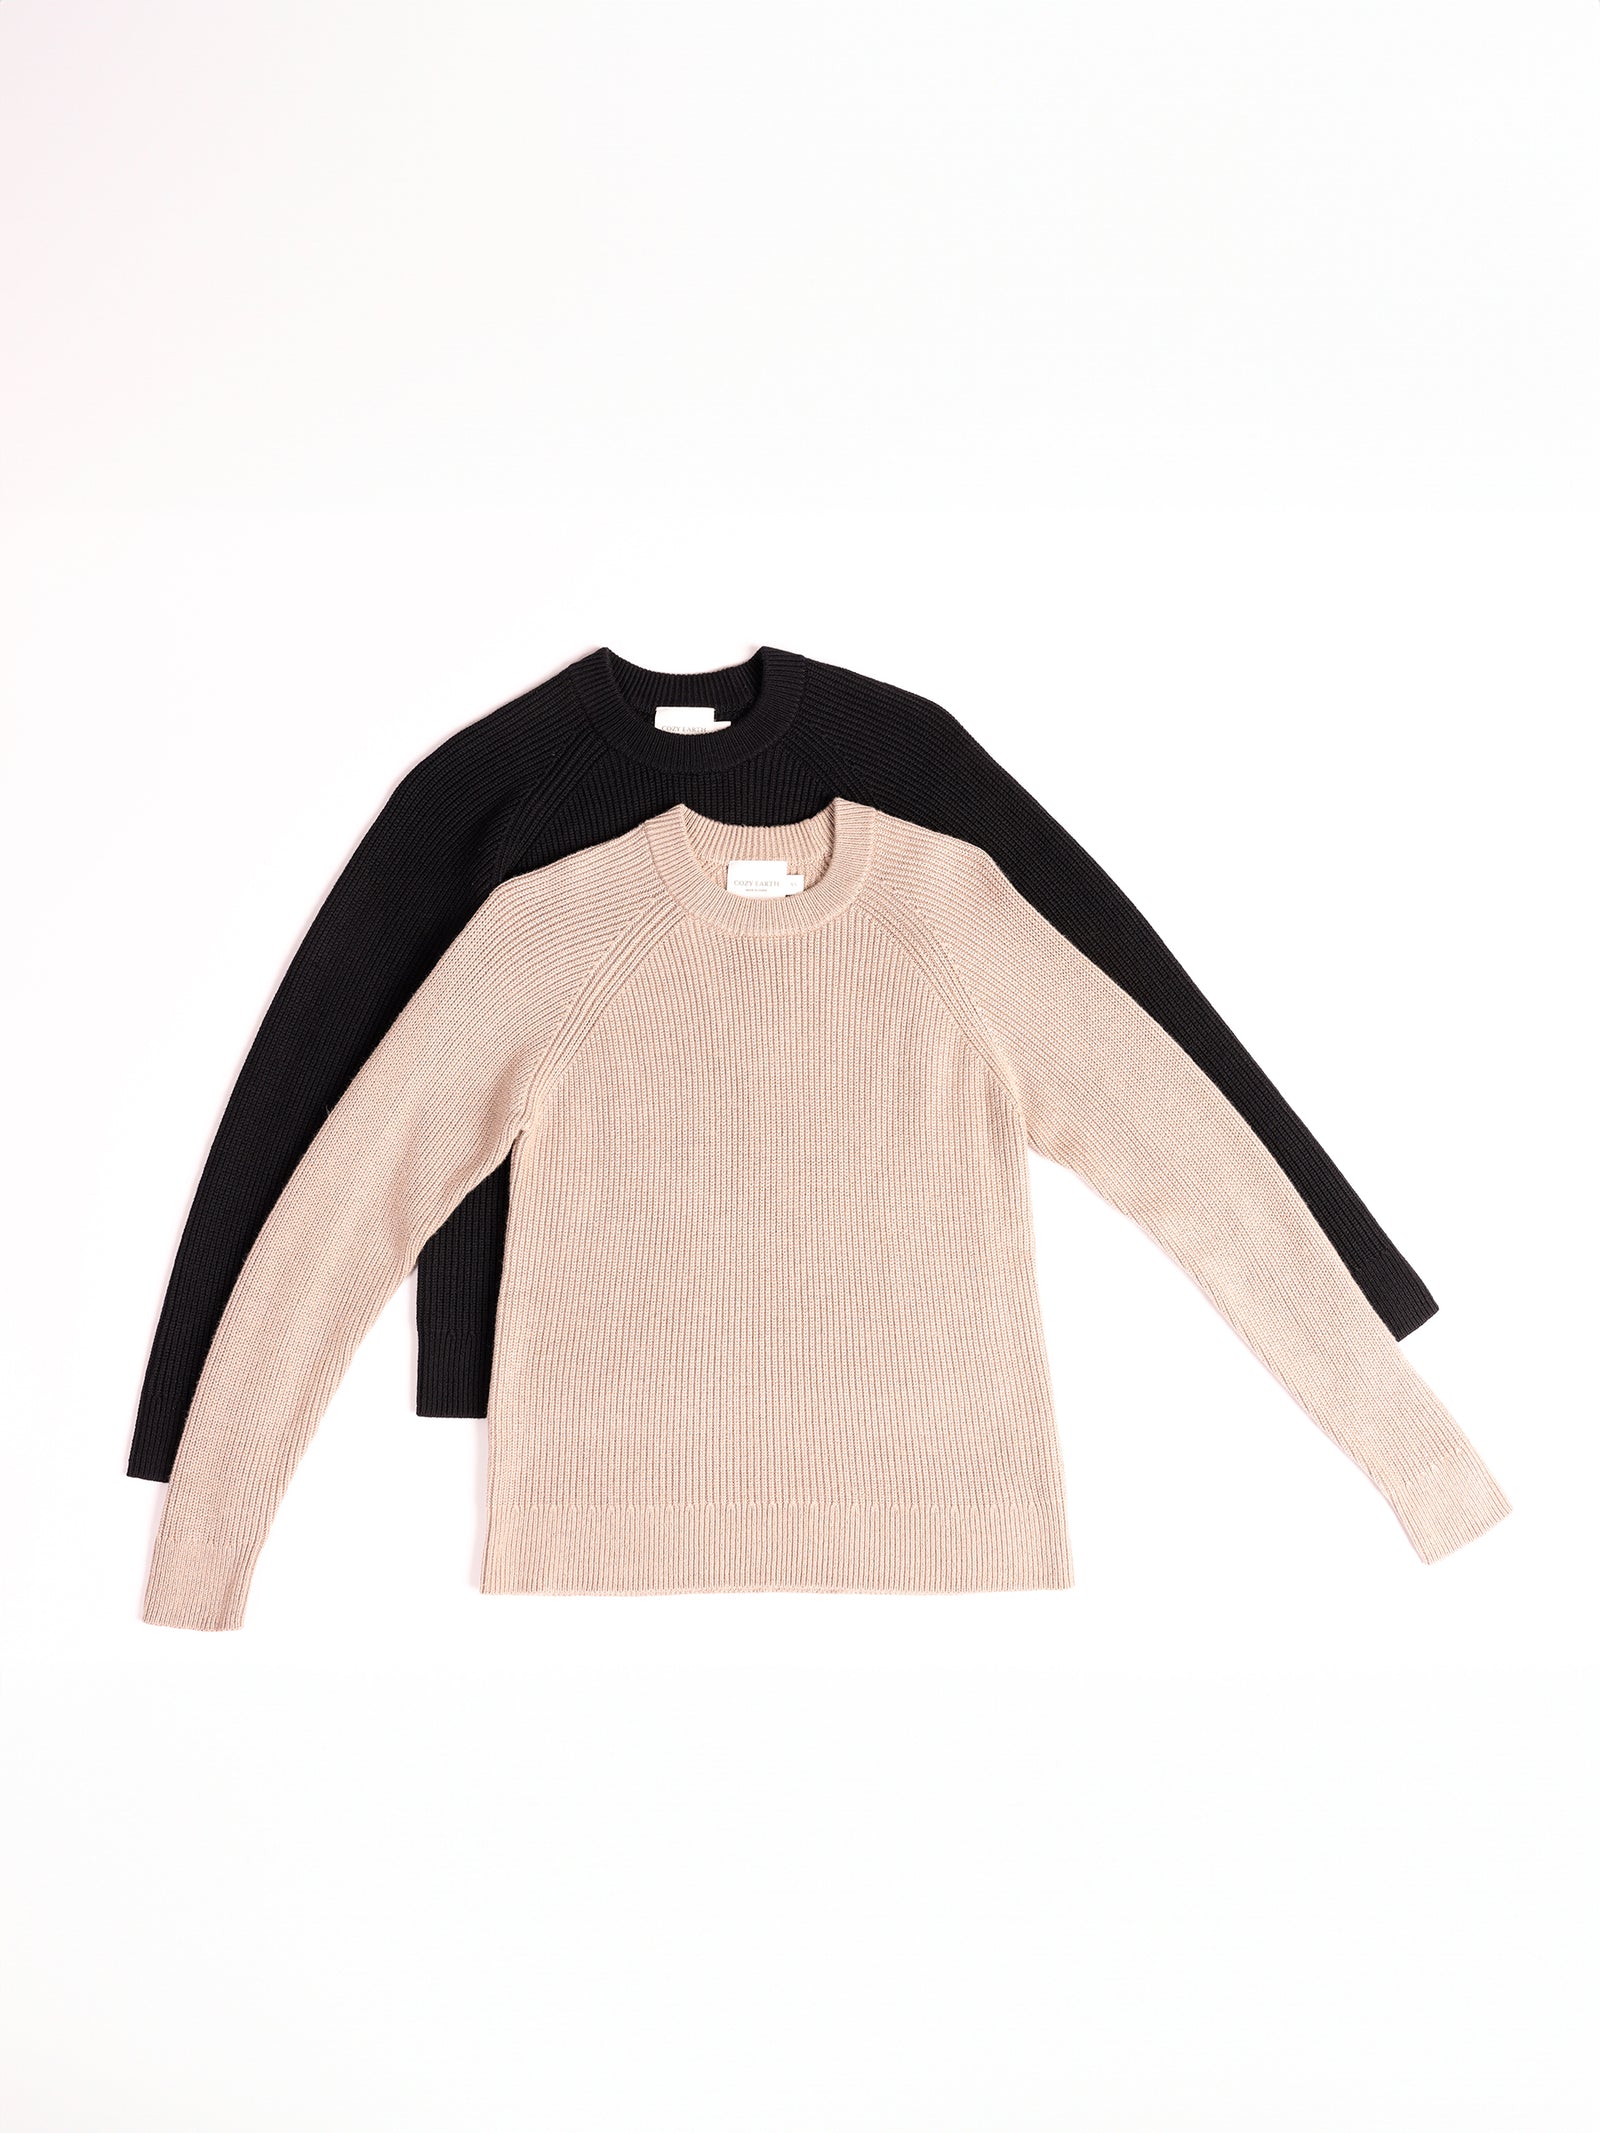 Two Cozy Earth Women's Classic Crewneck sweaters are laid flat next to each other. The front sweater is beige with a ribbed texture, while the back sweater is black. Both have crew necklines and appear to be made of a comfortable, knitted material. The background is plain white. 